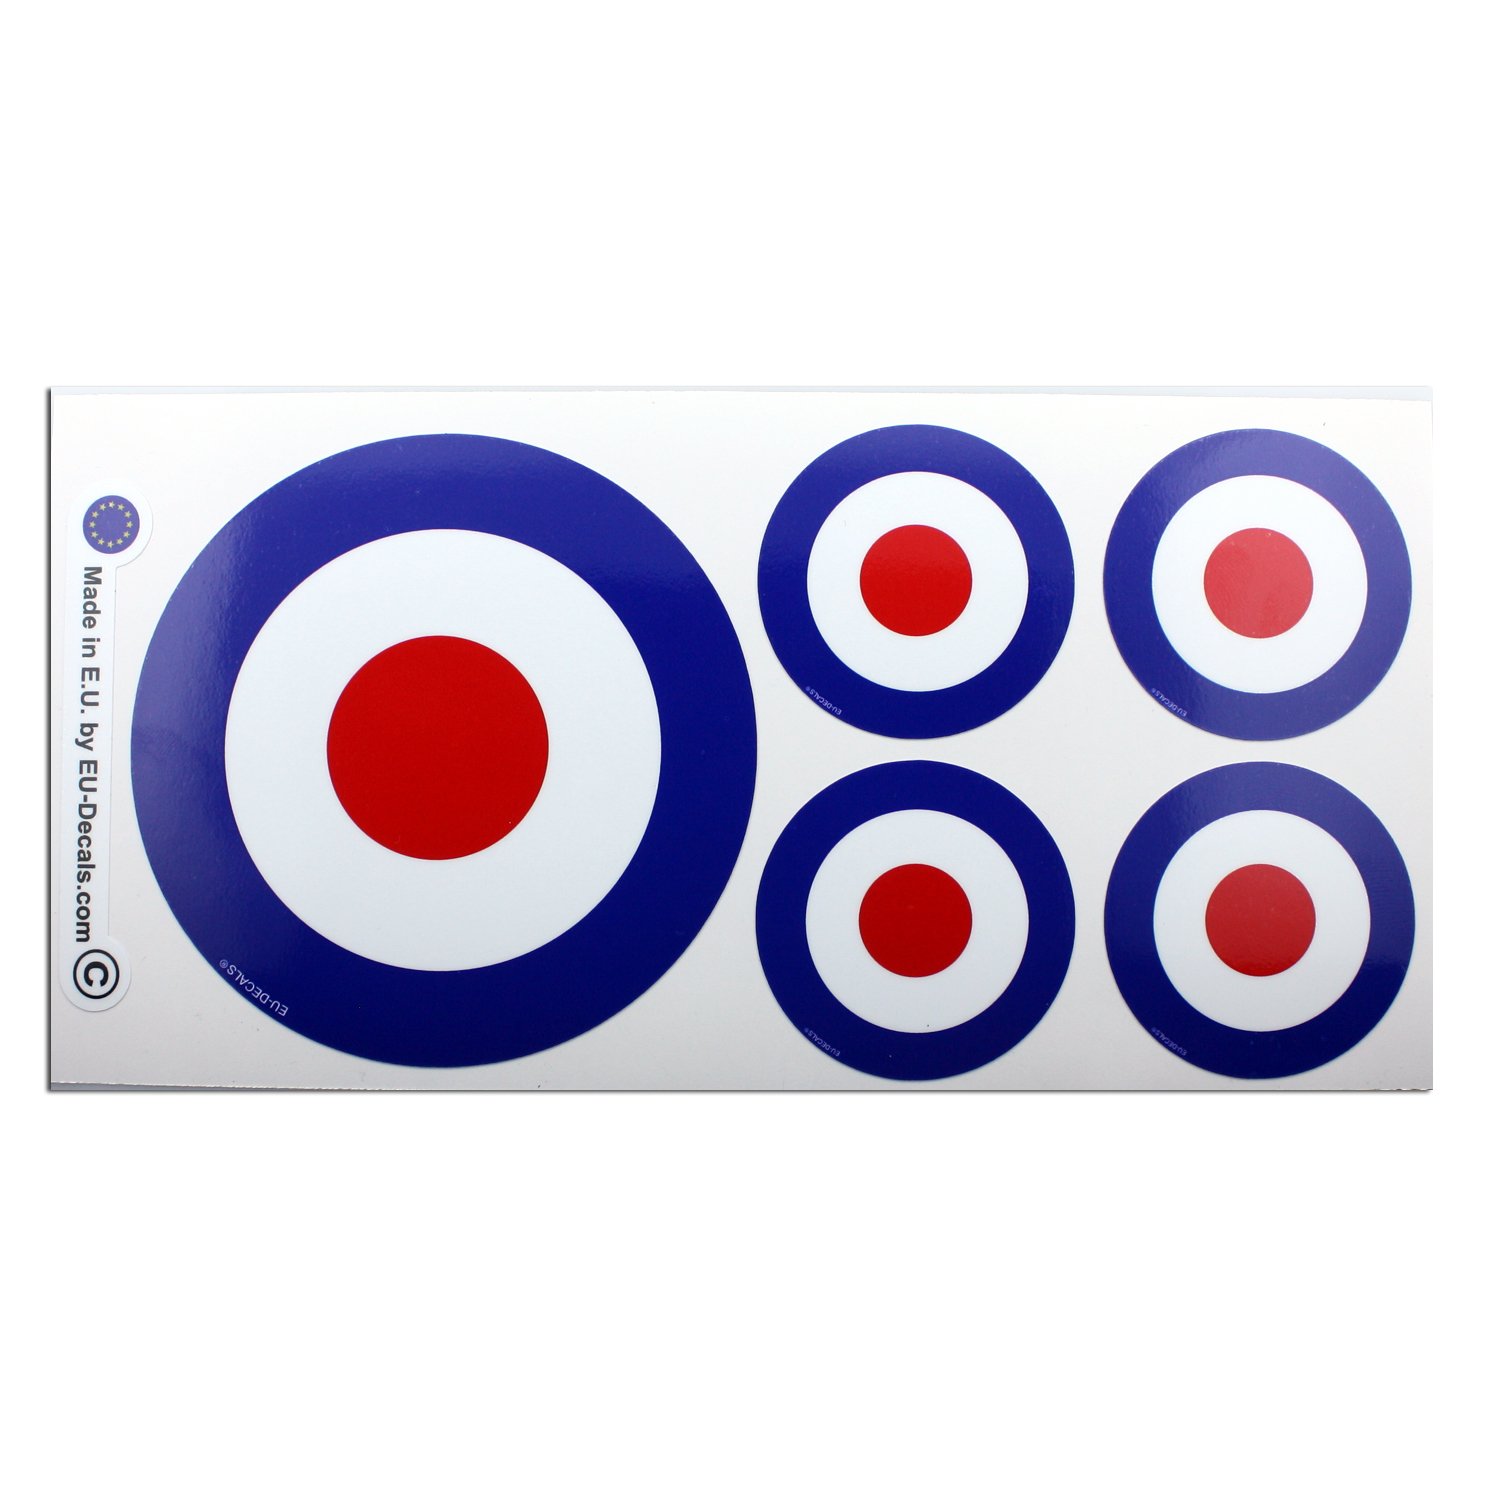 1 x 100 mm-4* & 4 x 50 mm Target Mod Blue Laminated Decal Sticker Classic Retro for Helmet Car Bike Scooter MioVespa Collection von EU-Decals - MioVespa Collection